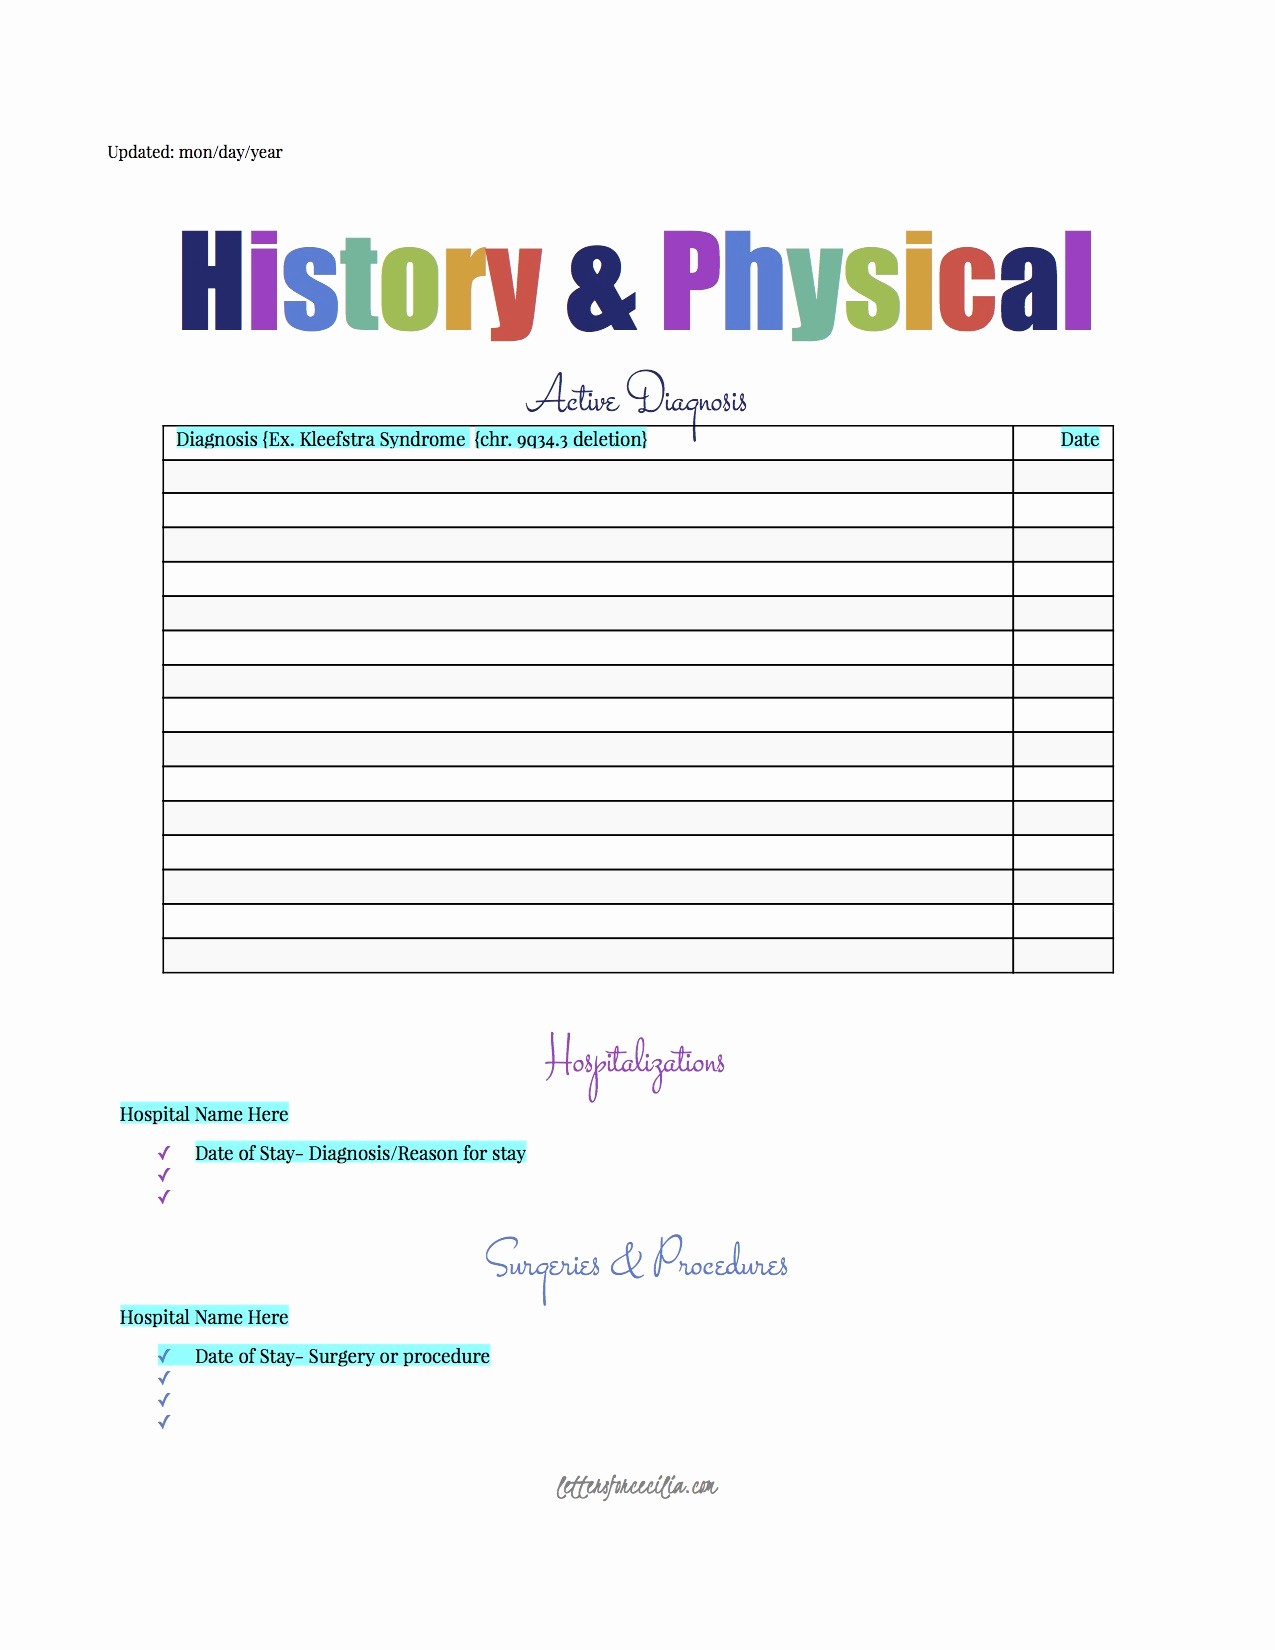 History and Physical Template Free Lovely Printable’s